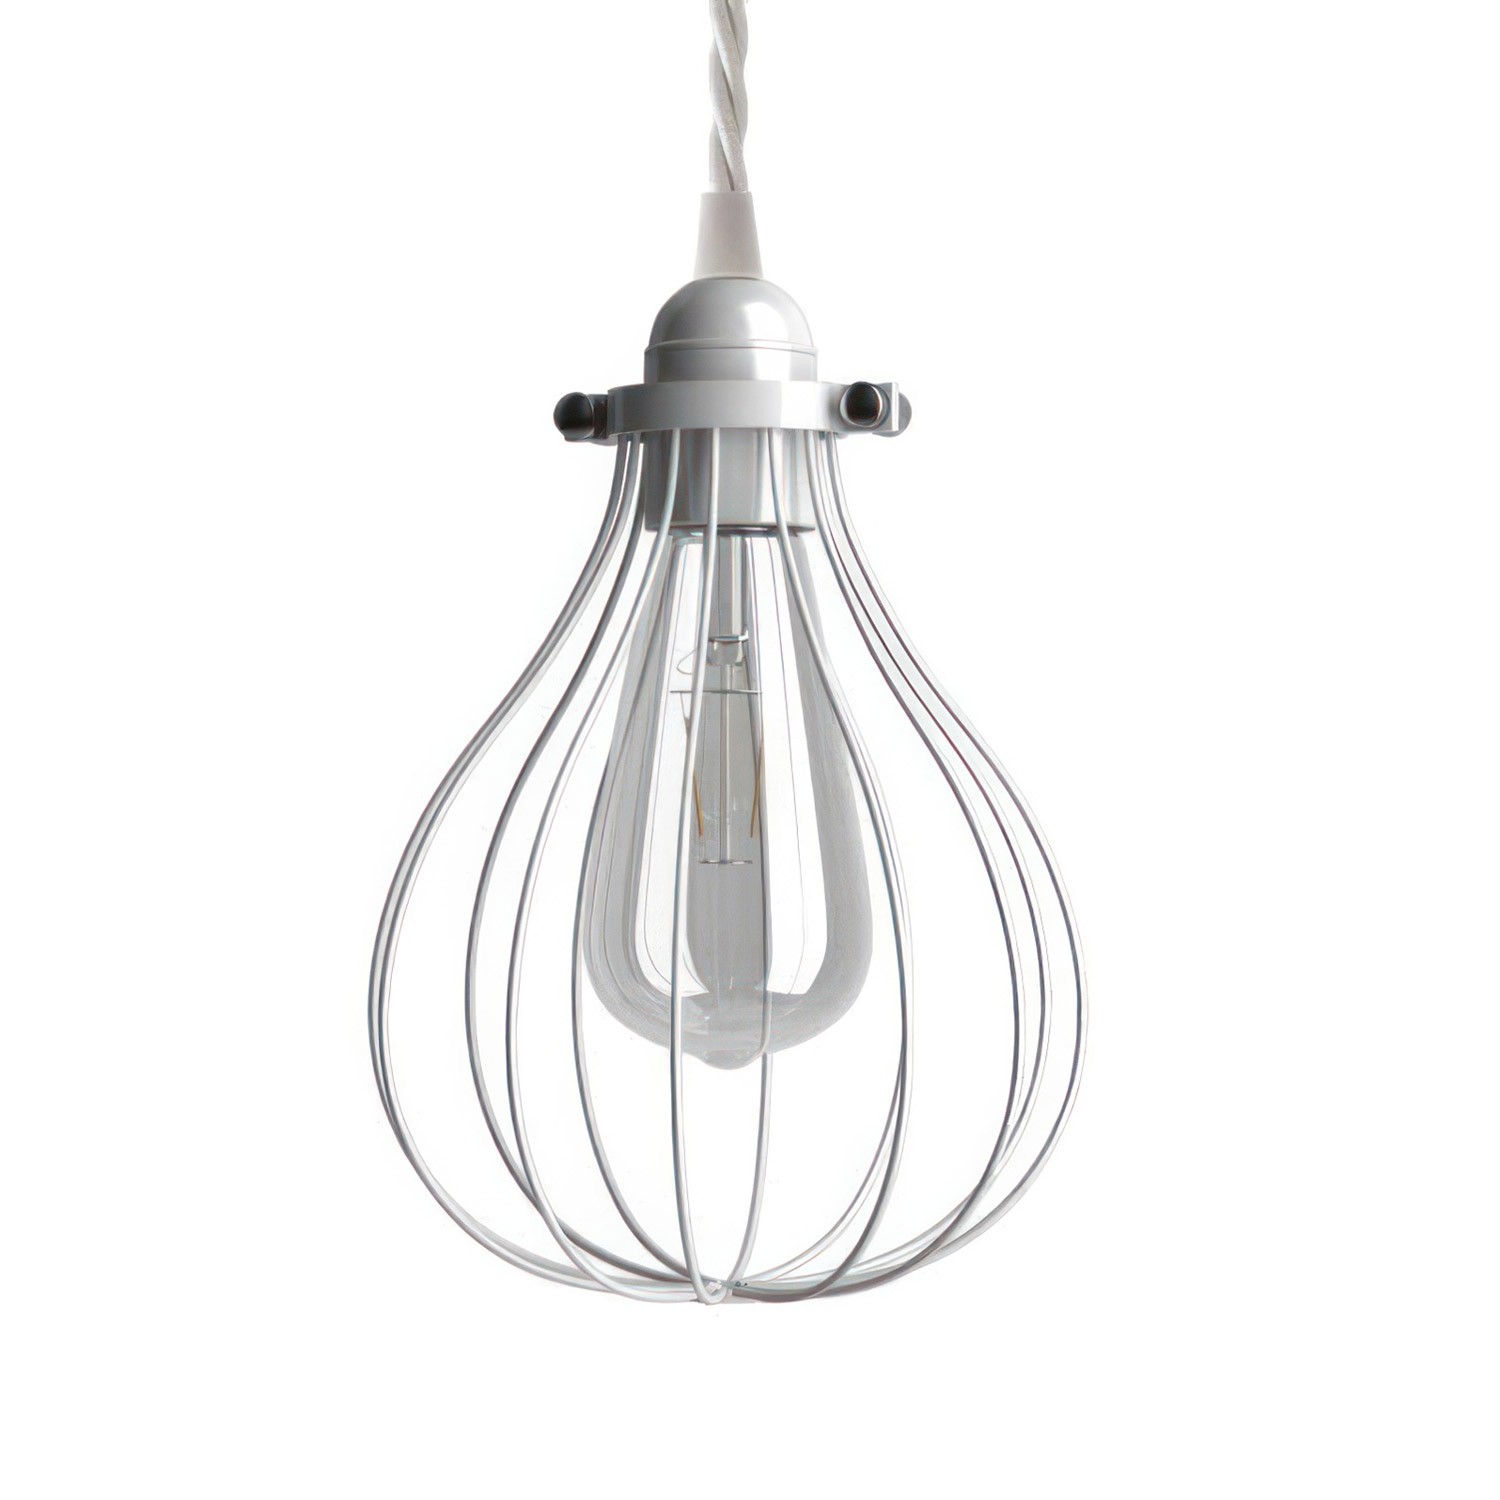 Pendant lamp with textile cable, Drop cage lampshade and metal details - Made in Italy